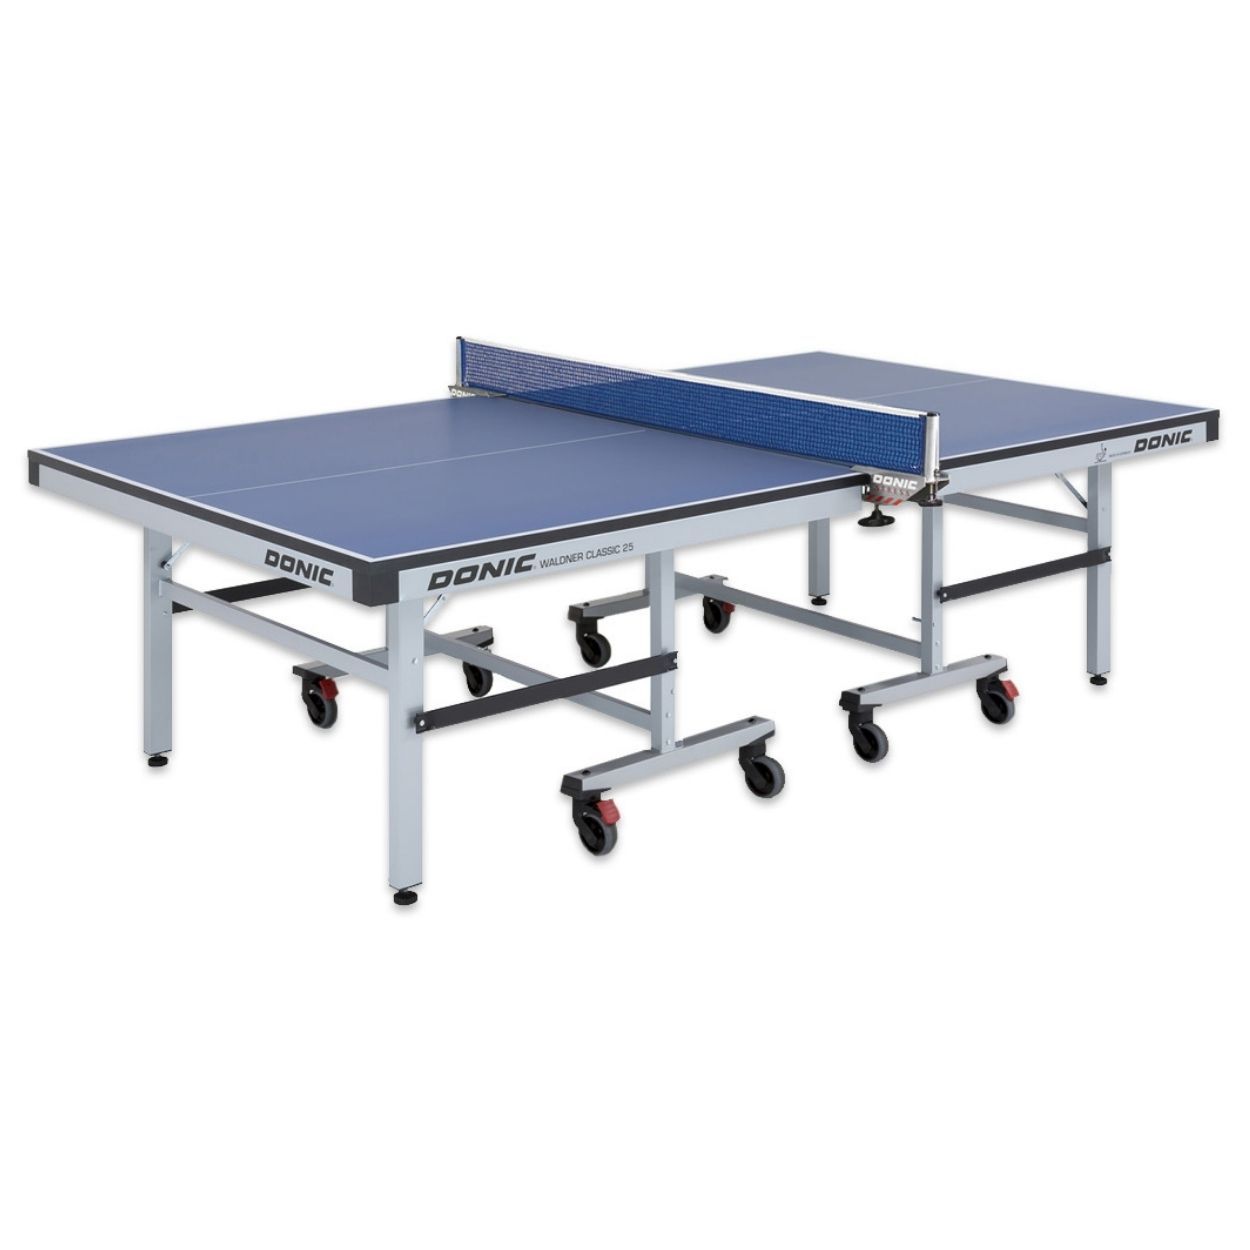 Donic Waldner Classic 25 Table Tennis Table